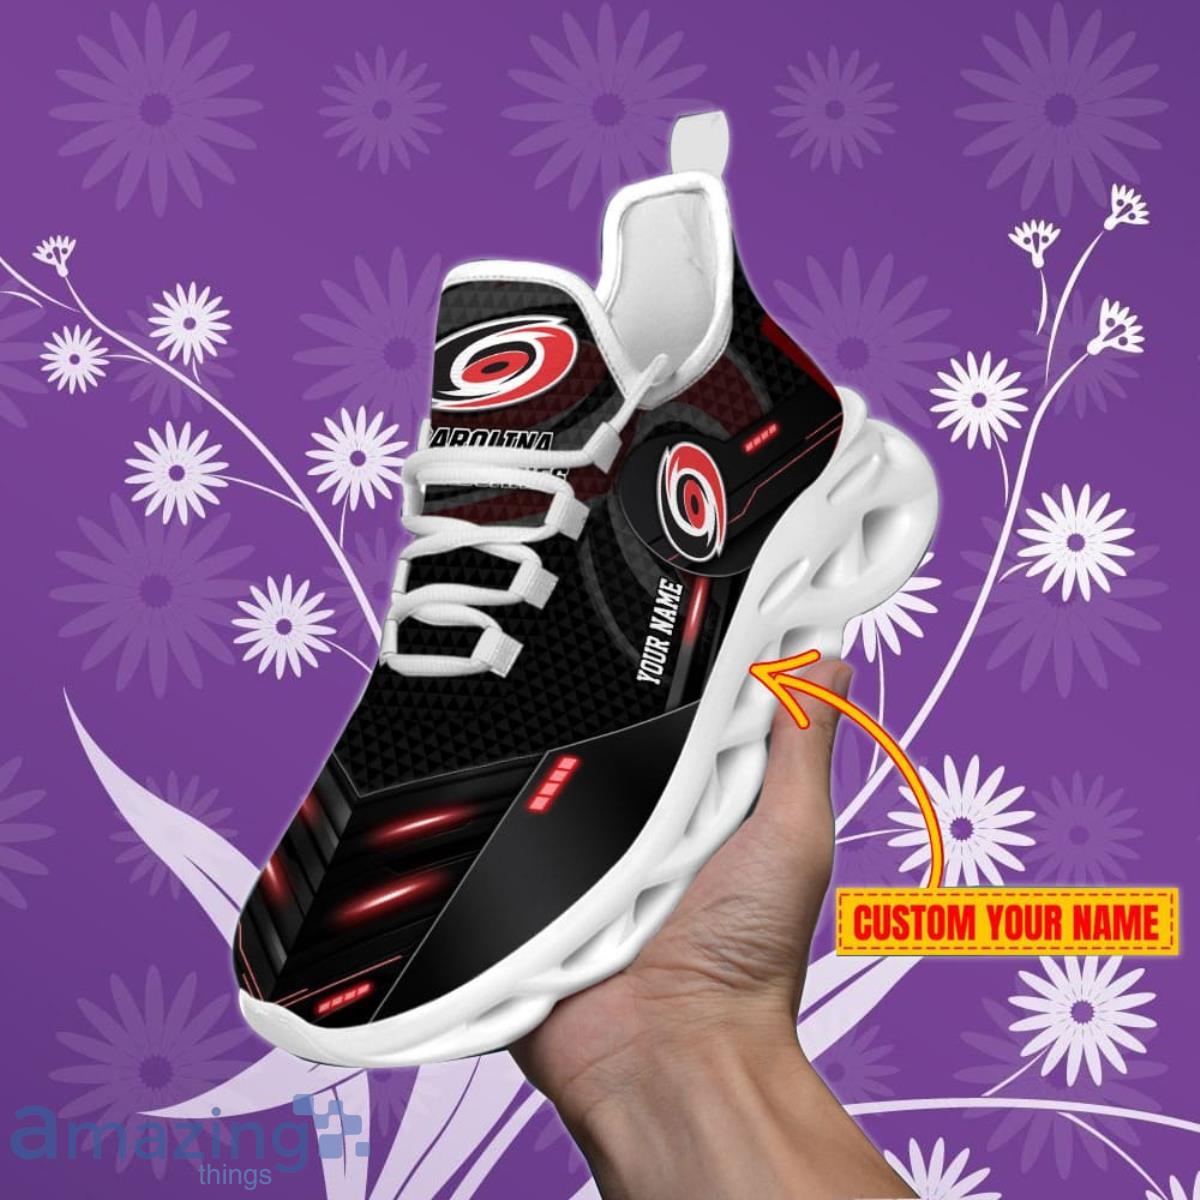 Carolina Hurricanes Personalized NHL Luxury Max Soul Shoes Gift Fans